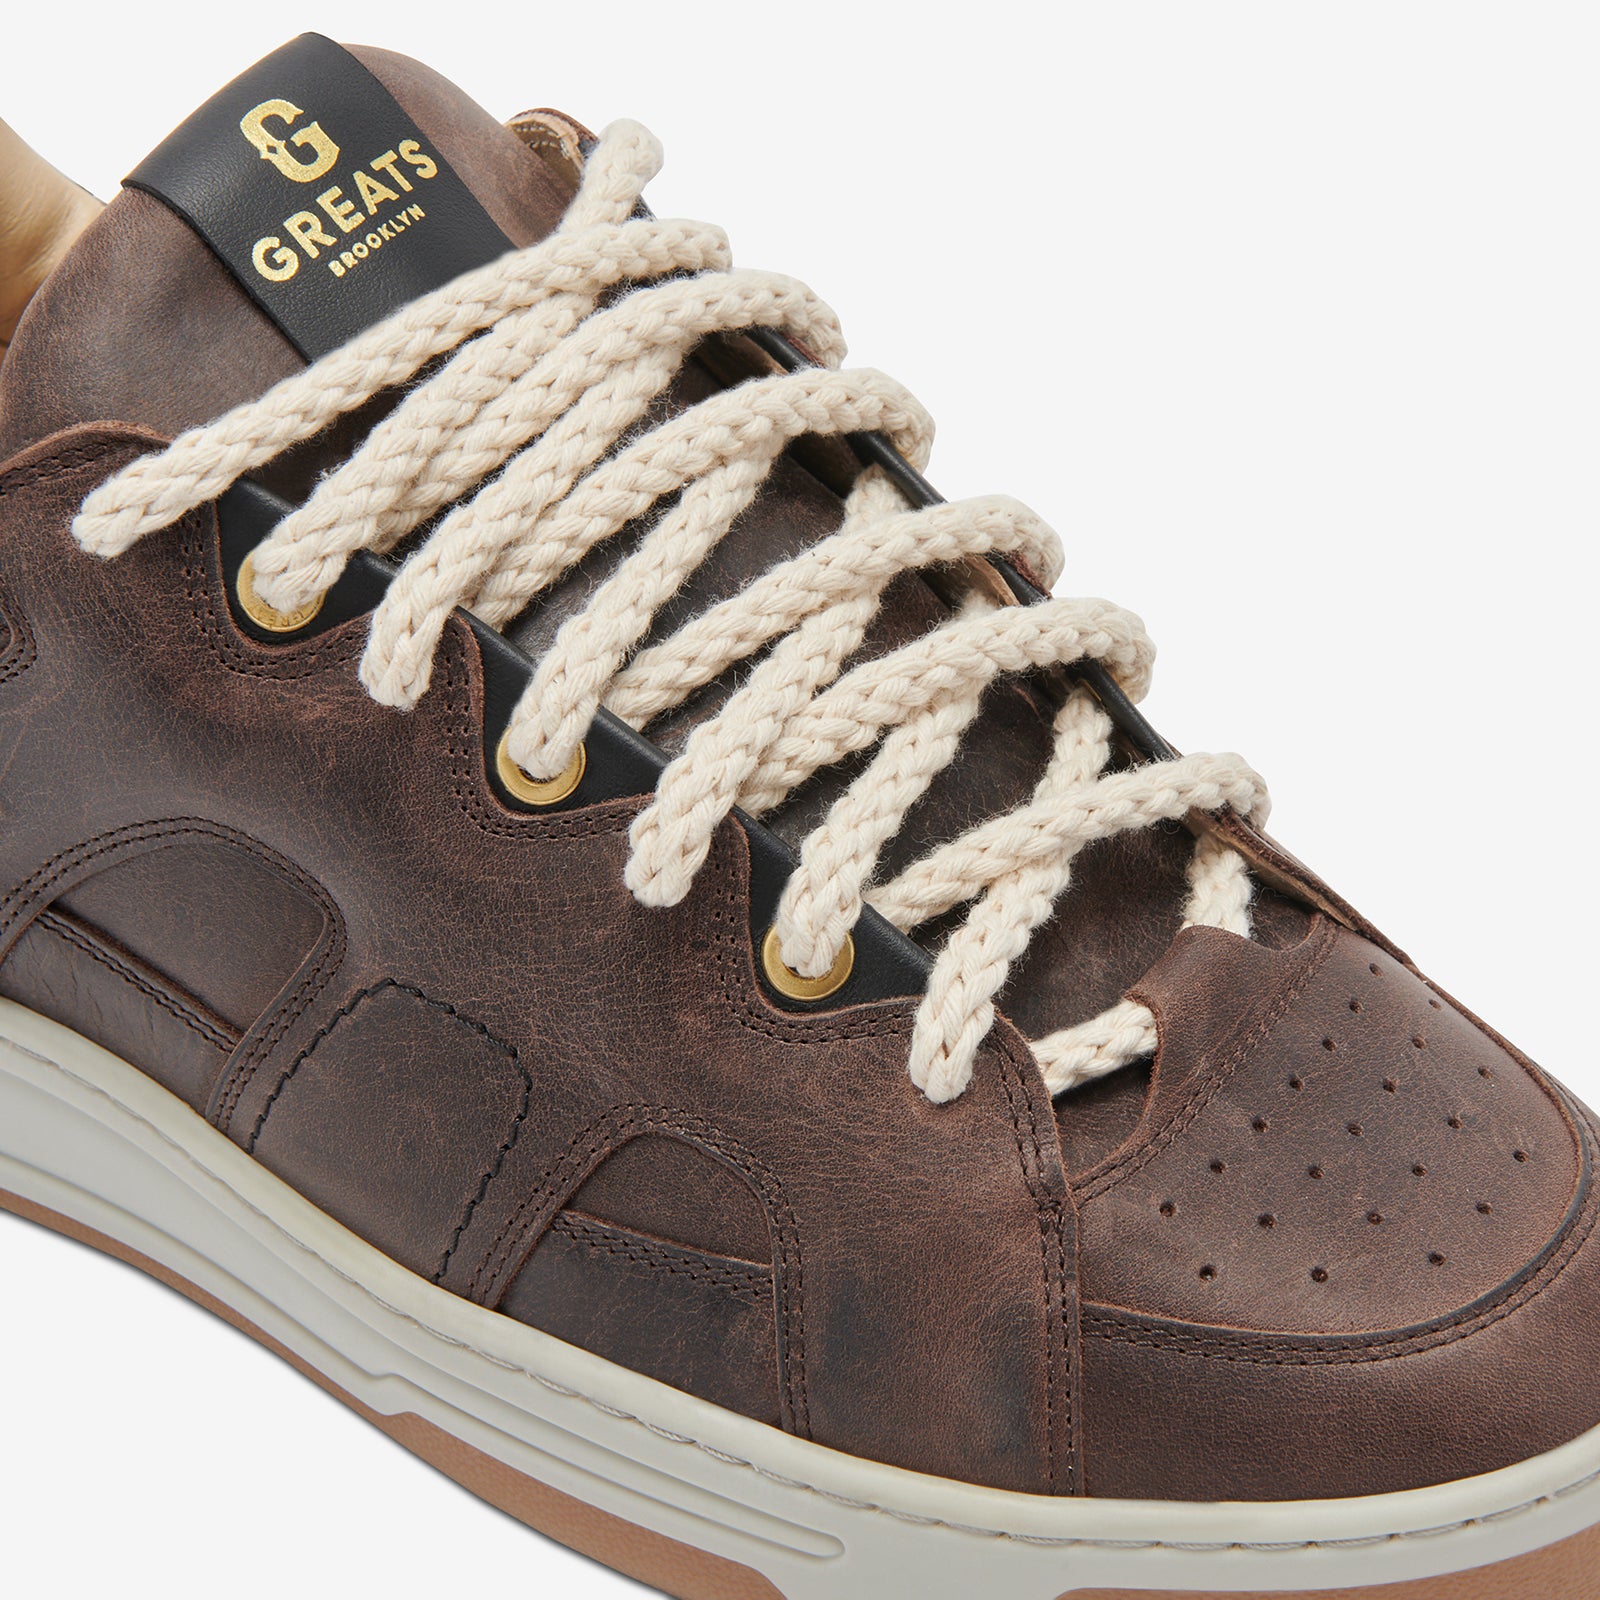 The Cooper Low Skate - Brown